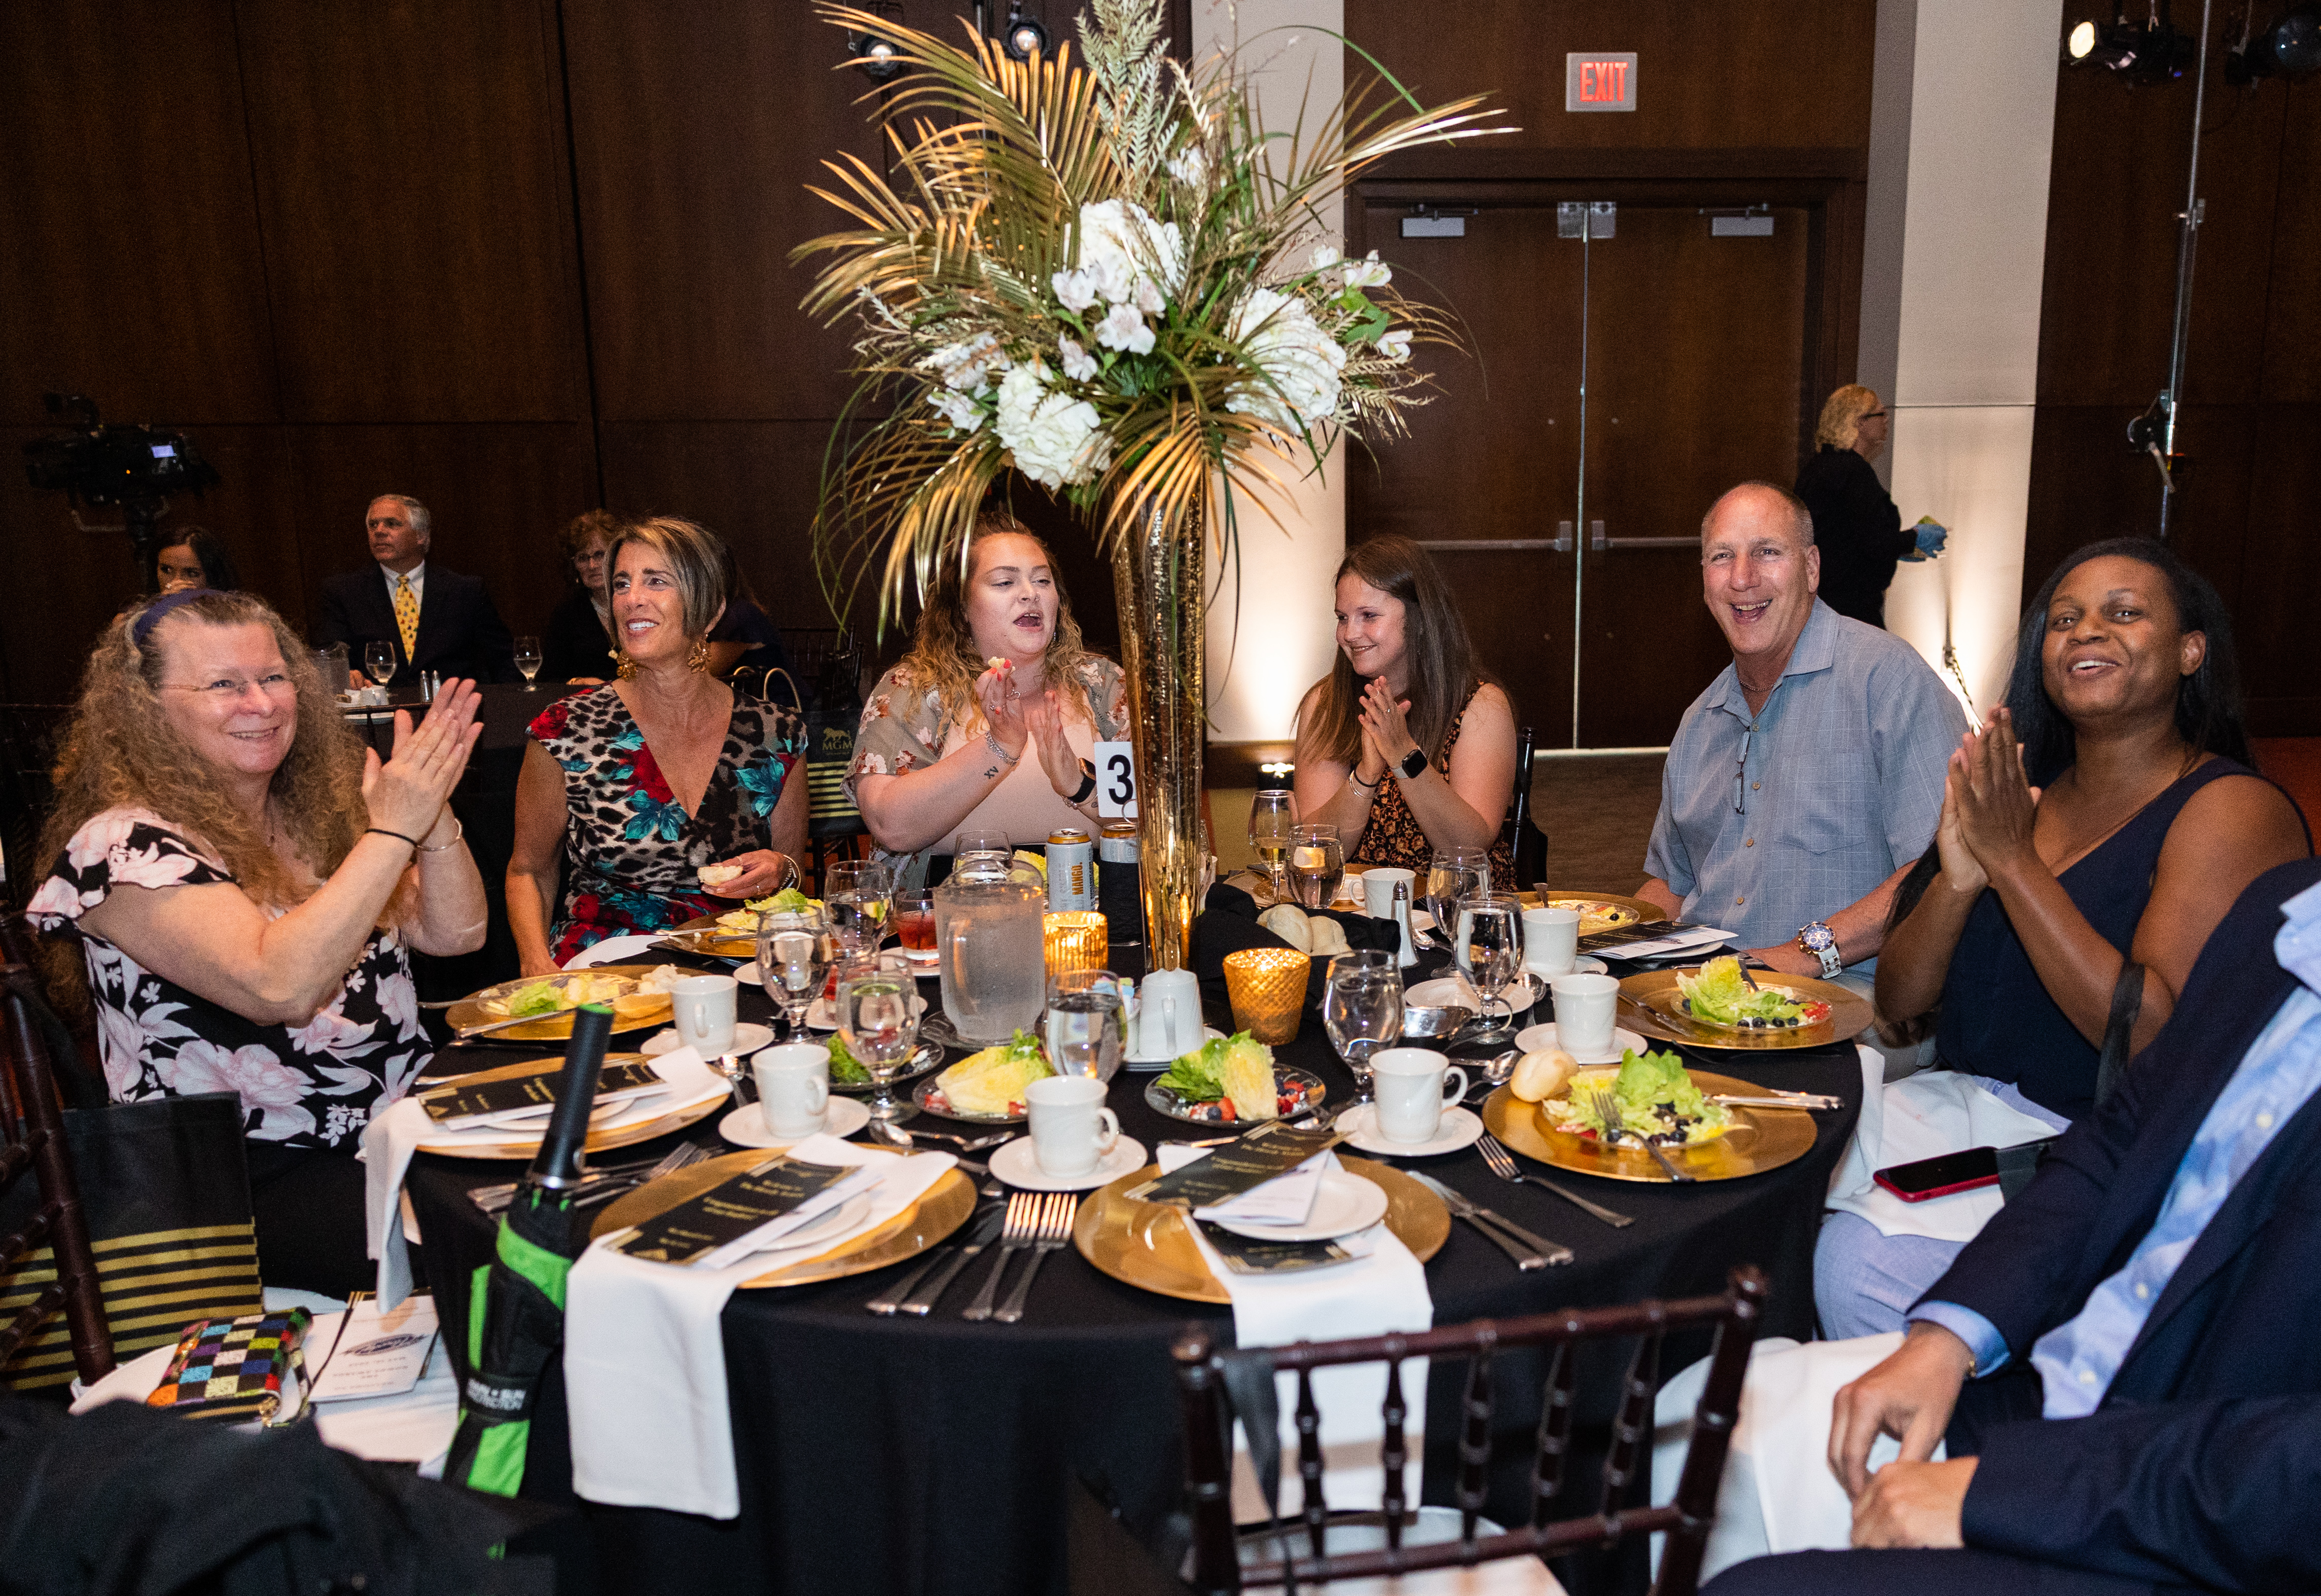 Gary Rome Auto Group table celebrating at the 25th annual Howdy Awards for Hospitality Excellence held at the MassMutual Center Monday evening, May 16, 2022. (Hoang ‘Leon’ Nguyen / The Republican)